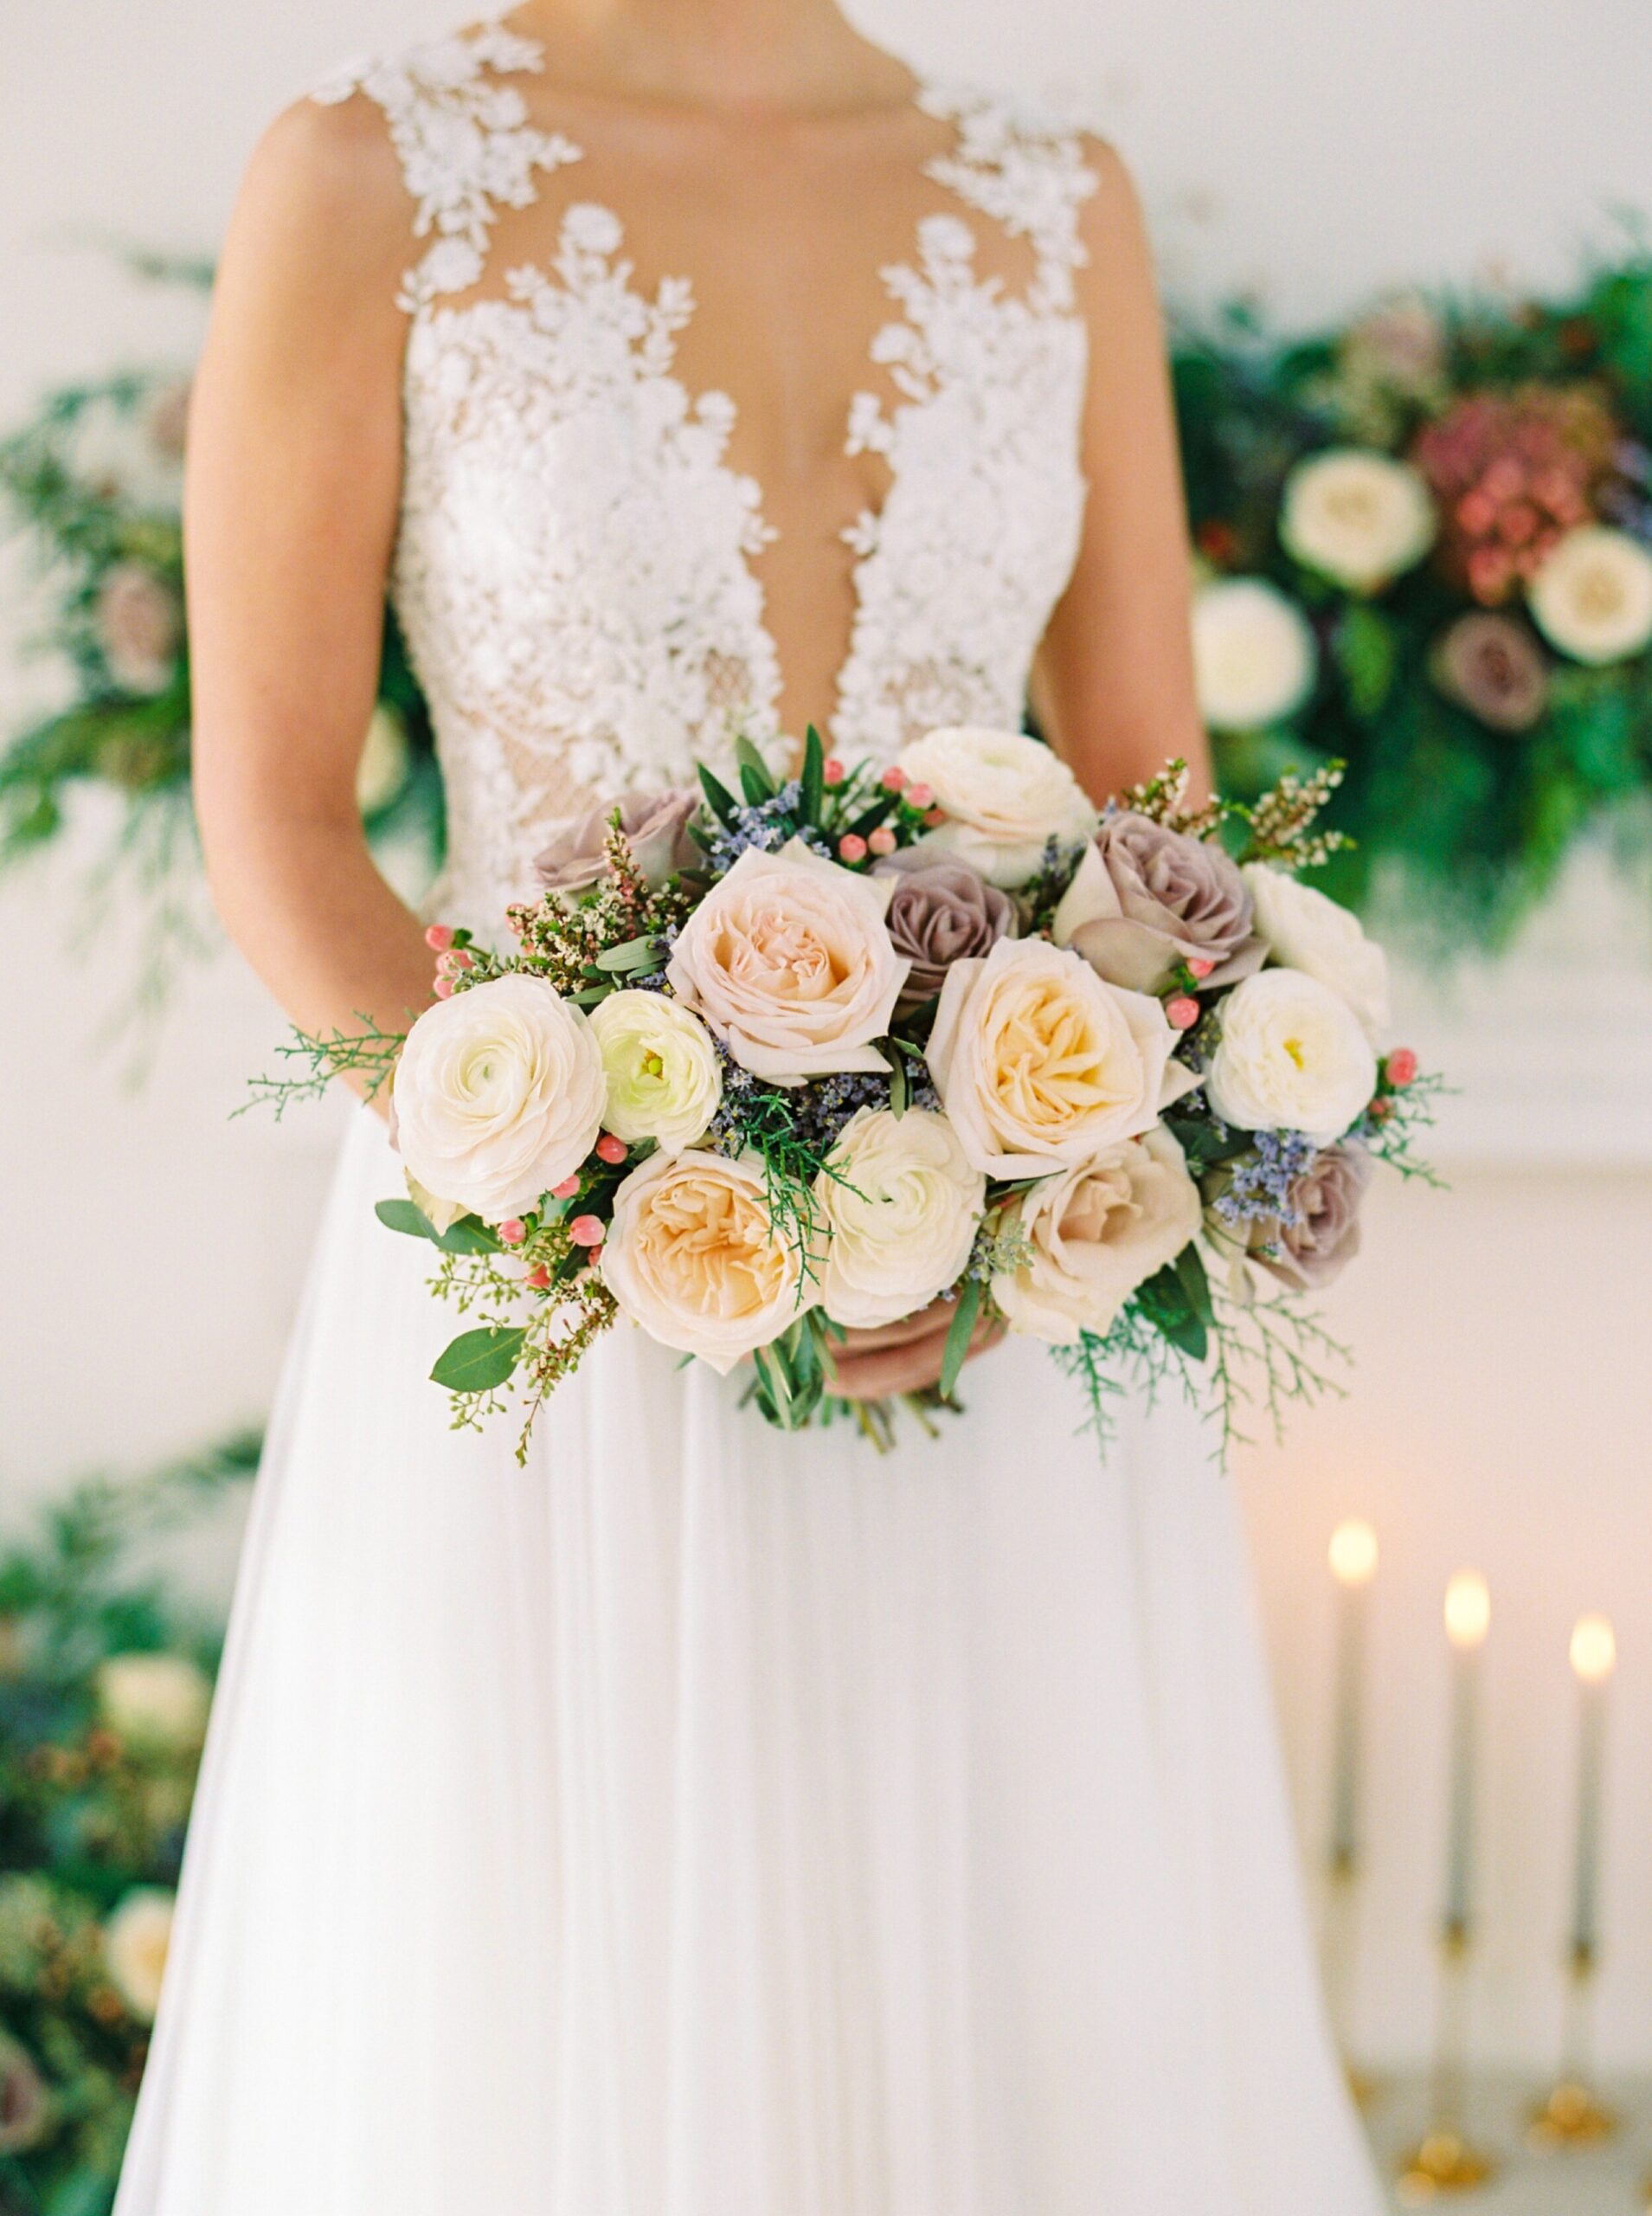  wedding dress inspiration | fine art flower installation with greenery above fireplace | modern bridal bouquet with dusty pinks and roses 